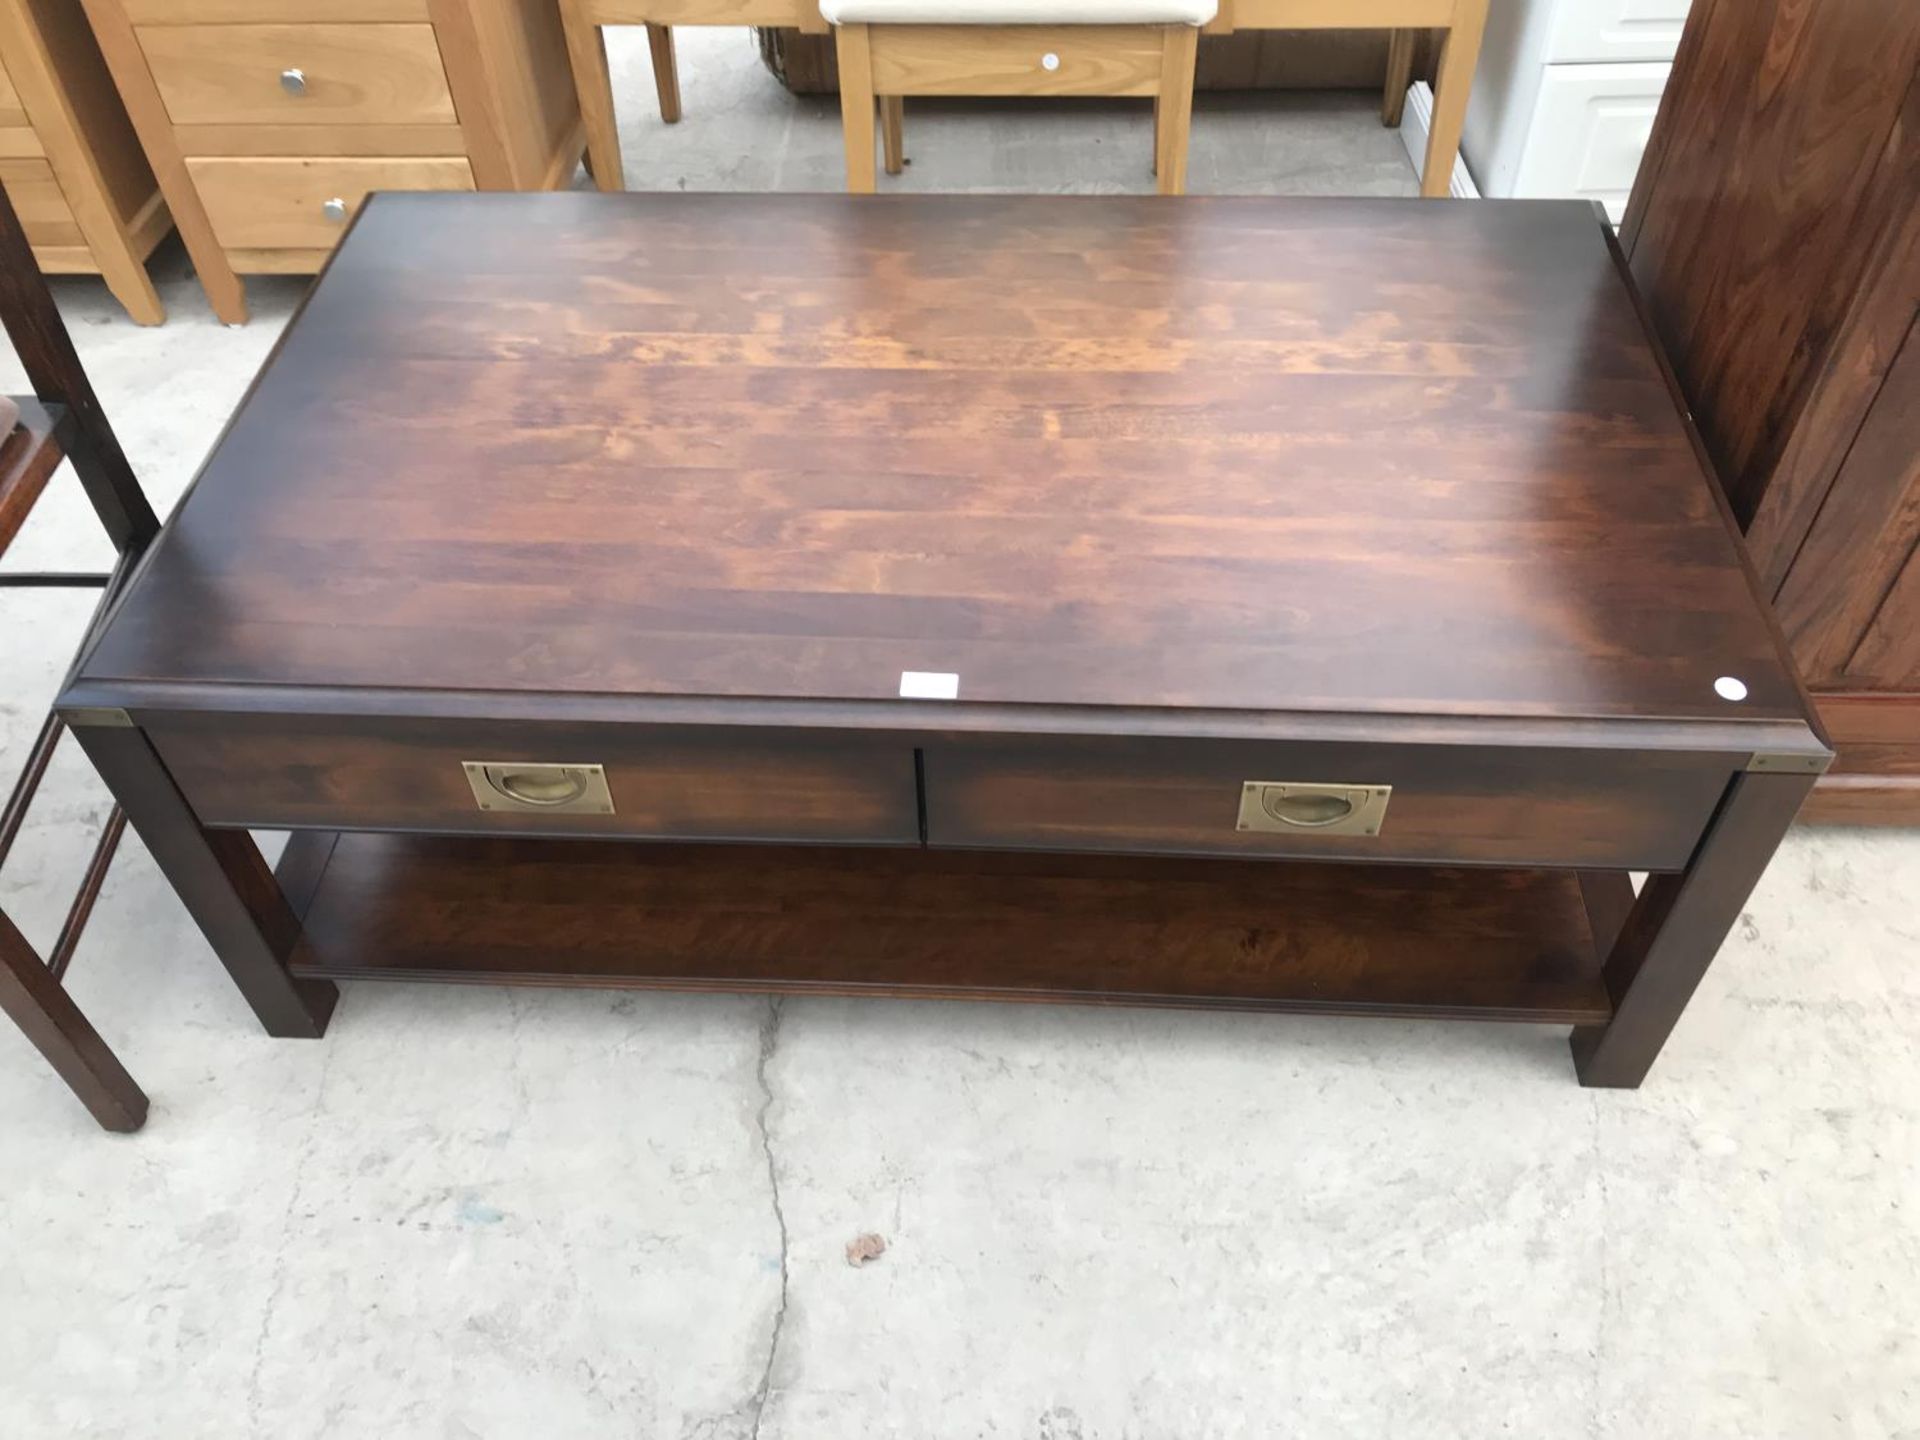 A MAHOGANY COFFEE TABLE WITH TWO DRAWERS WITH RECESSED BRASS HANDLES